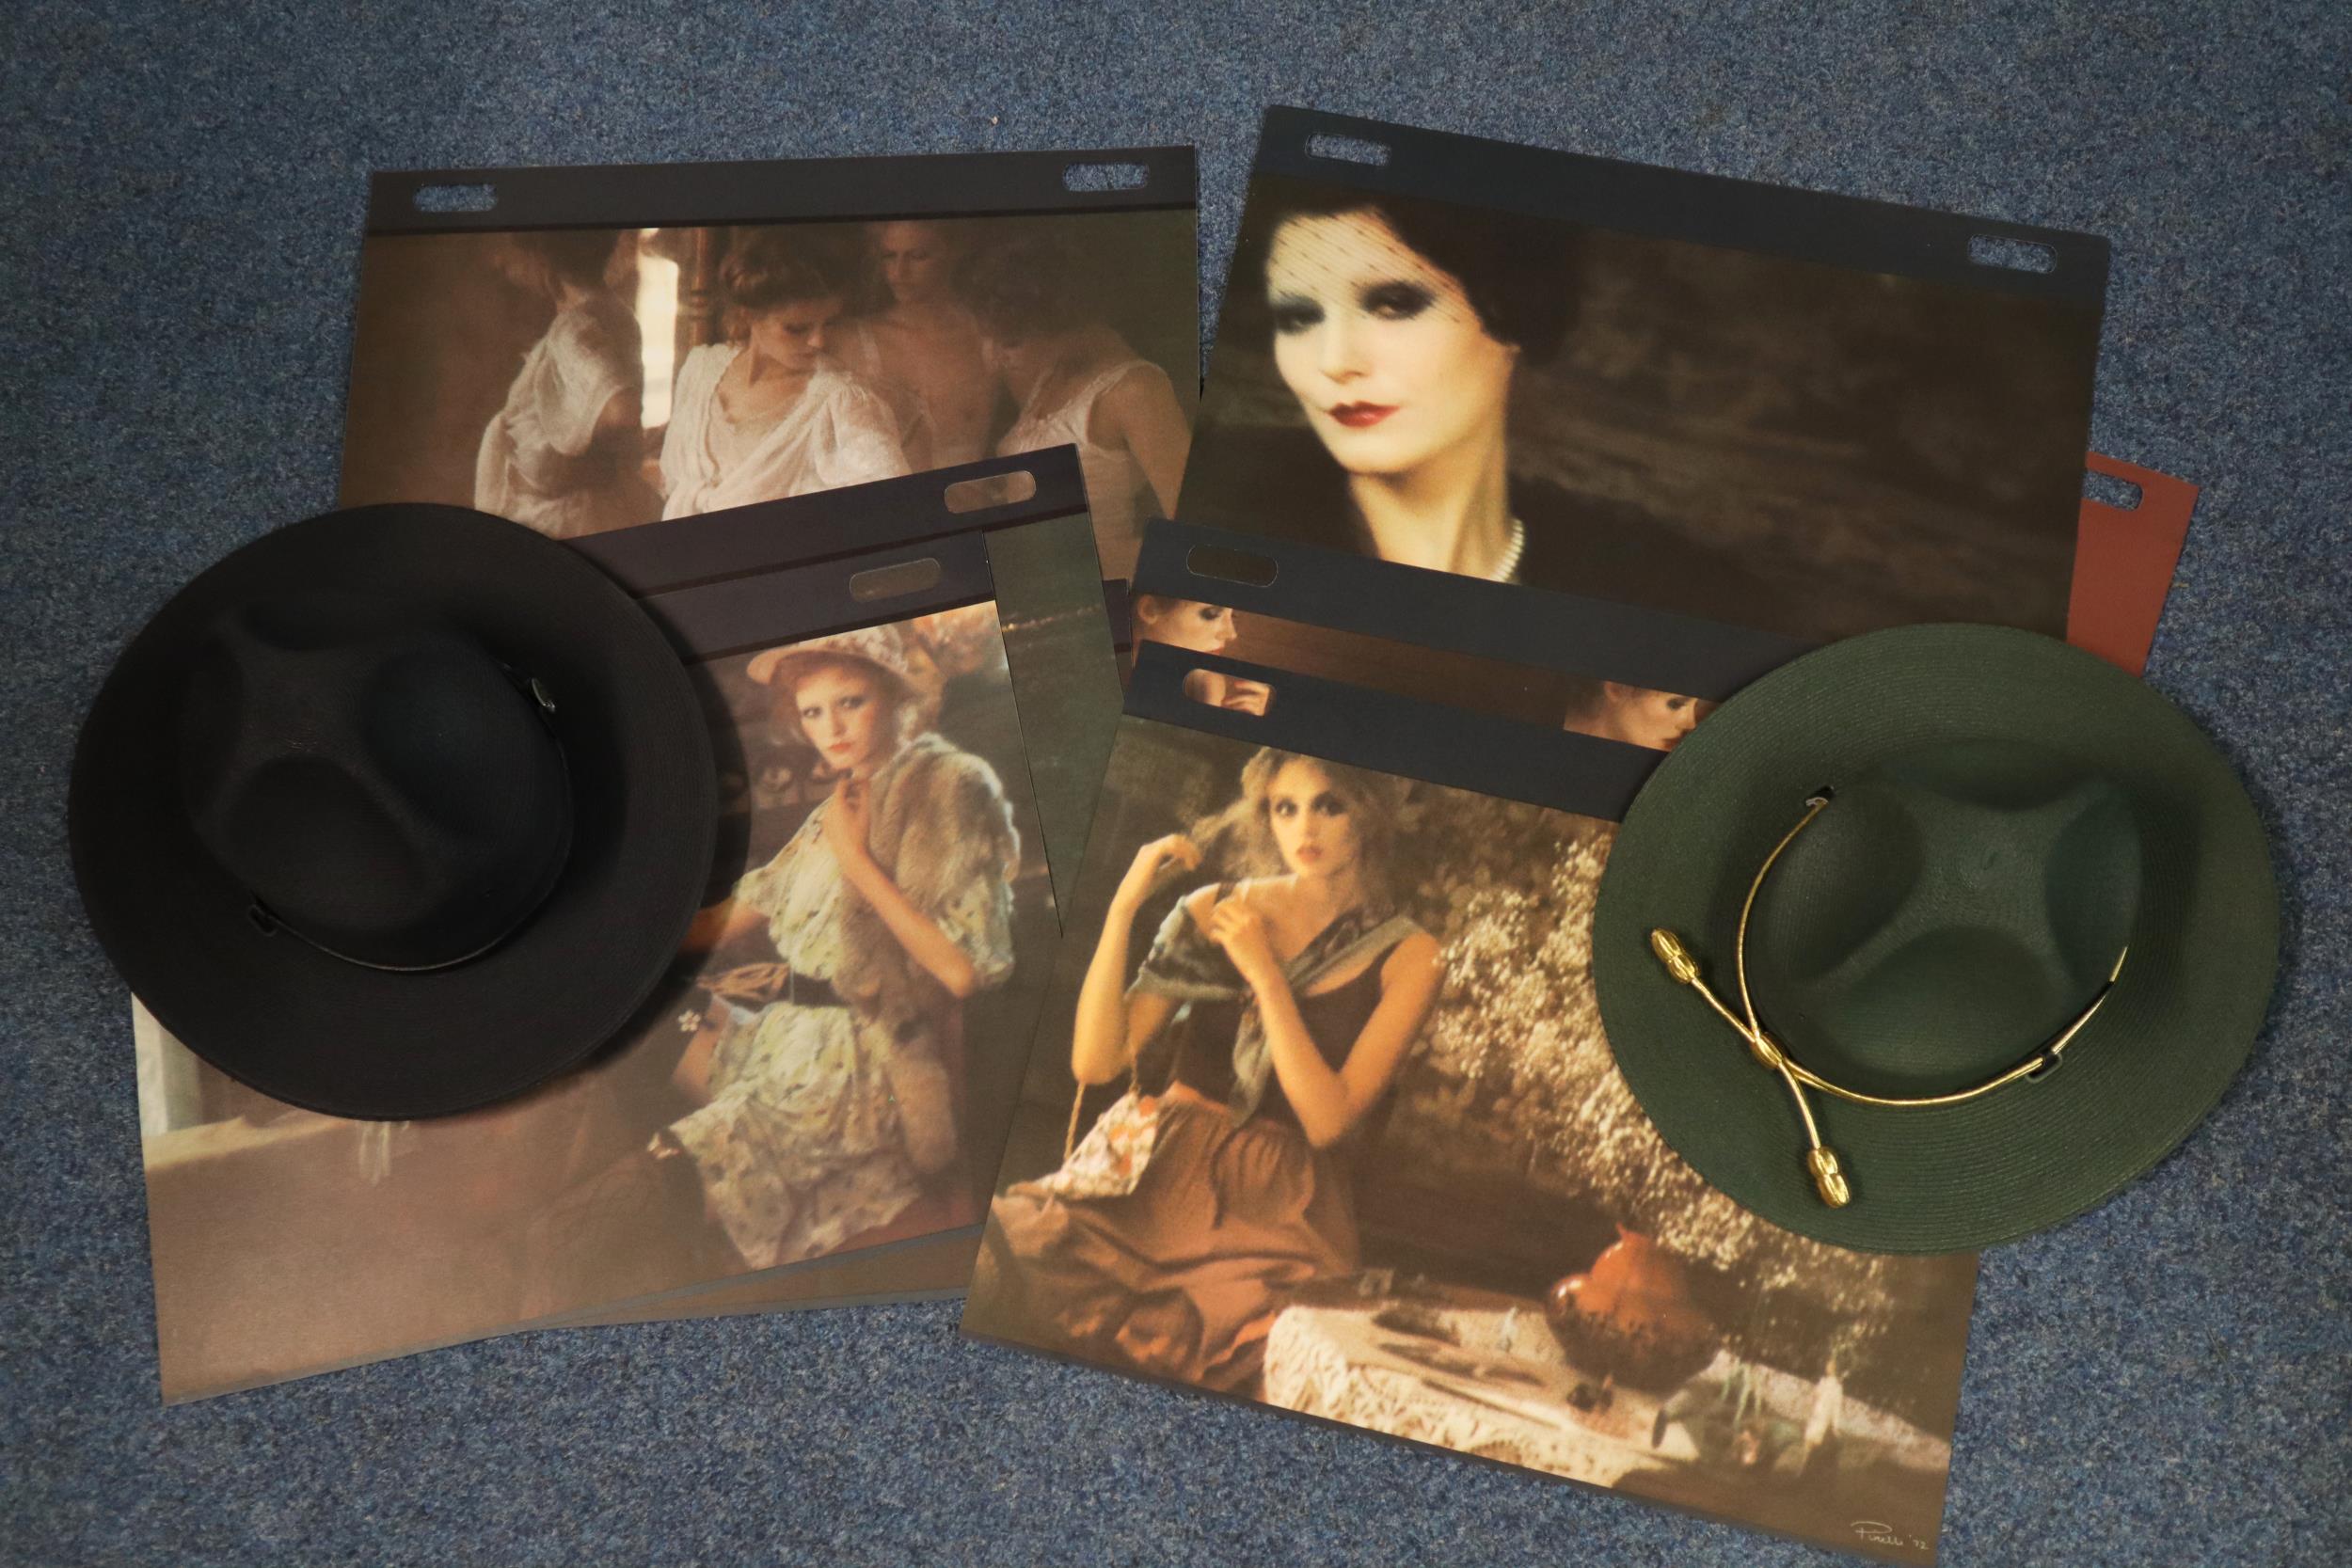 Two Stratton USA hats in original boxes together with a Pirelli calendar. (B.P. 21% + VAT)